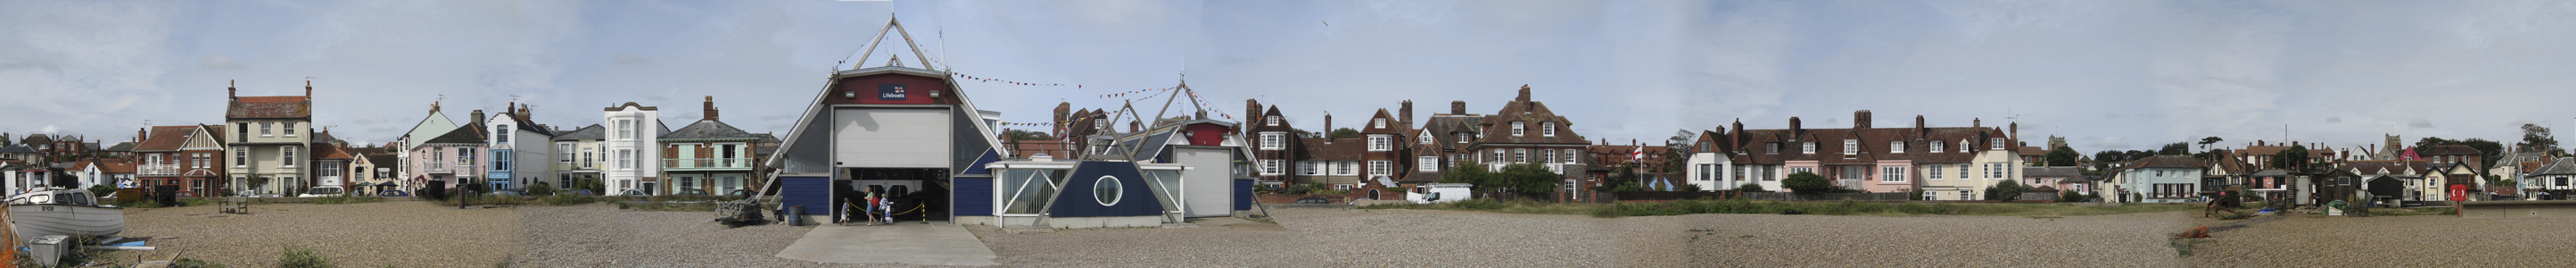 Aldeburgh Seafront and Lifeboat Station